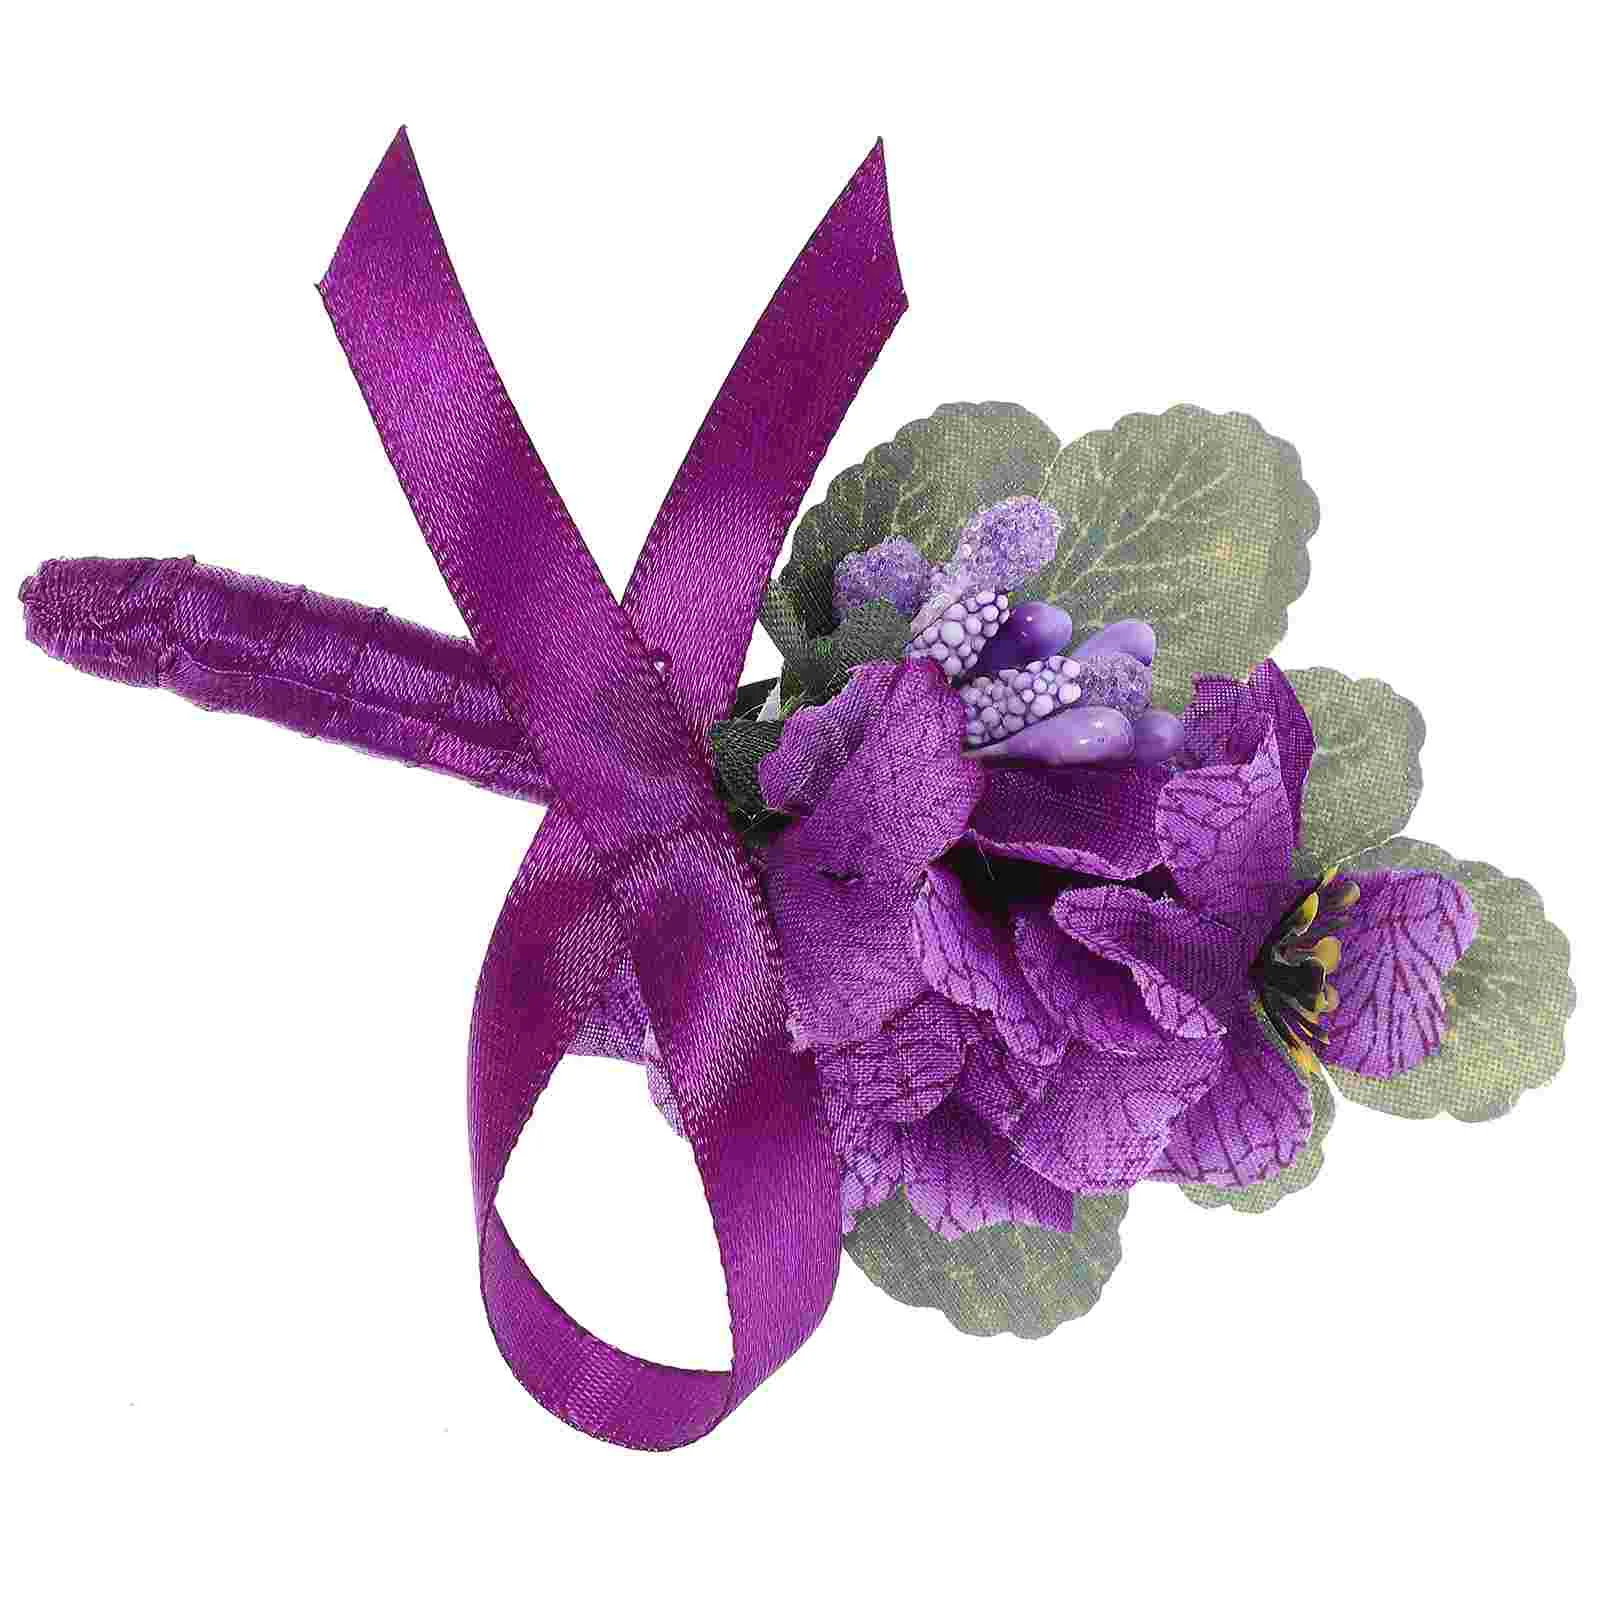 Men's Corsage Flower Lapel Pin Violets Groom Boutonniere for Wedding Gift Brooch Suit Man new fashion retro color metal wolf brooch pin badge lapel pin shirt suit collar jewelry gift for men summer wear nice gift